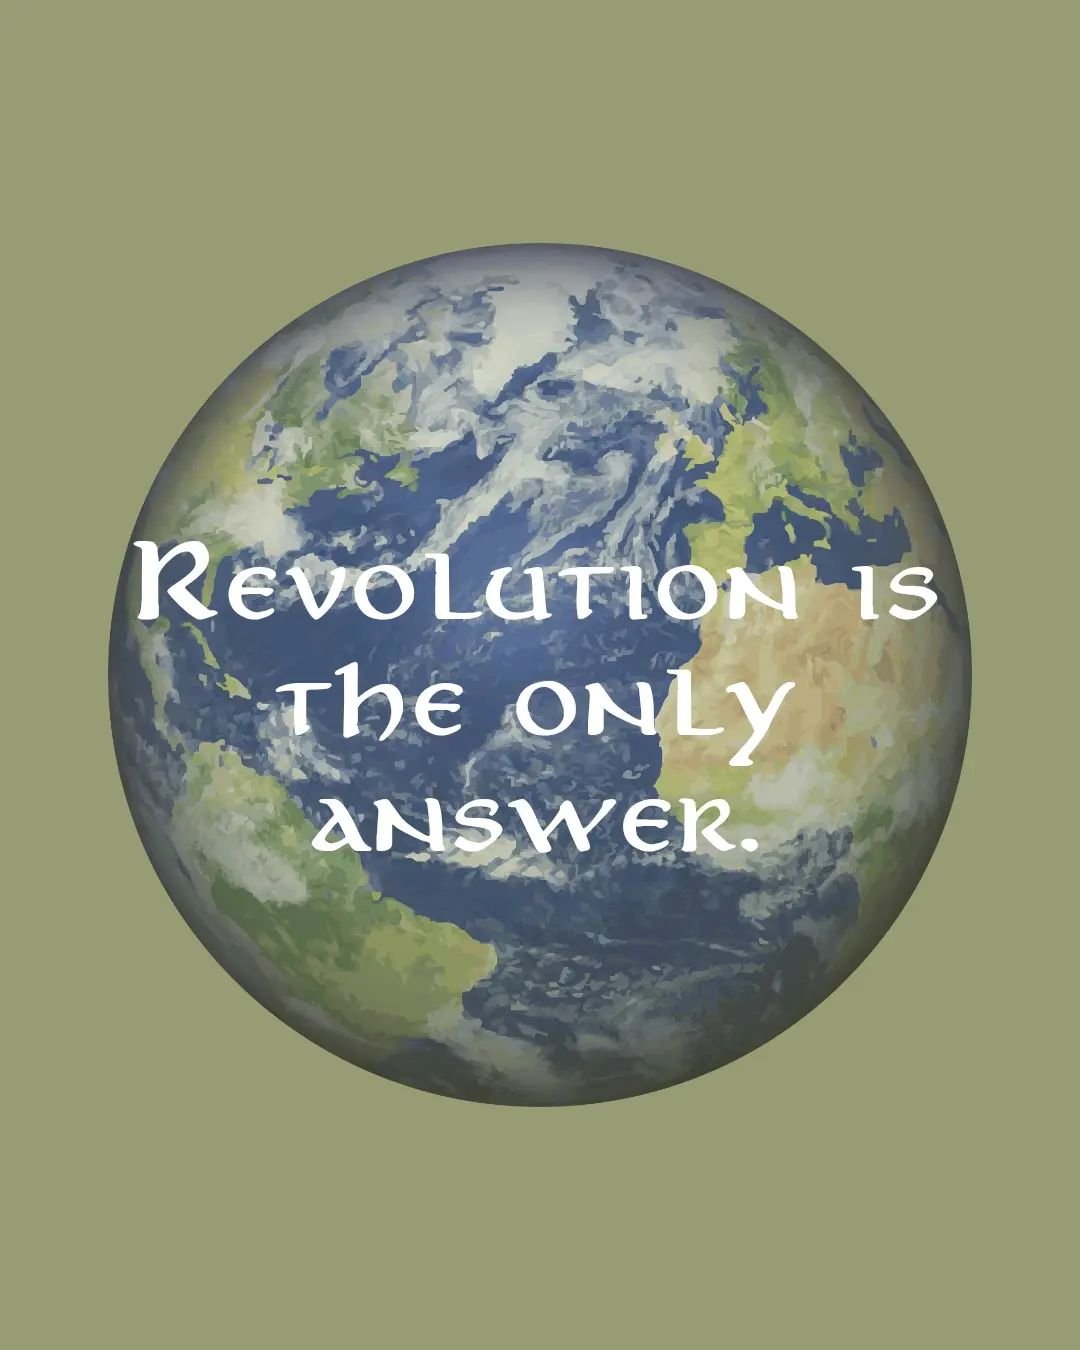 The time is well and truly now. 

Revolution is the only answer. 

The darkness on Earth is being illuminated through the atrocities we are witnessing unfold. 

We are being shown how much of our power and sovereignty we have given away to these harm